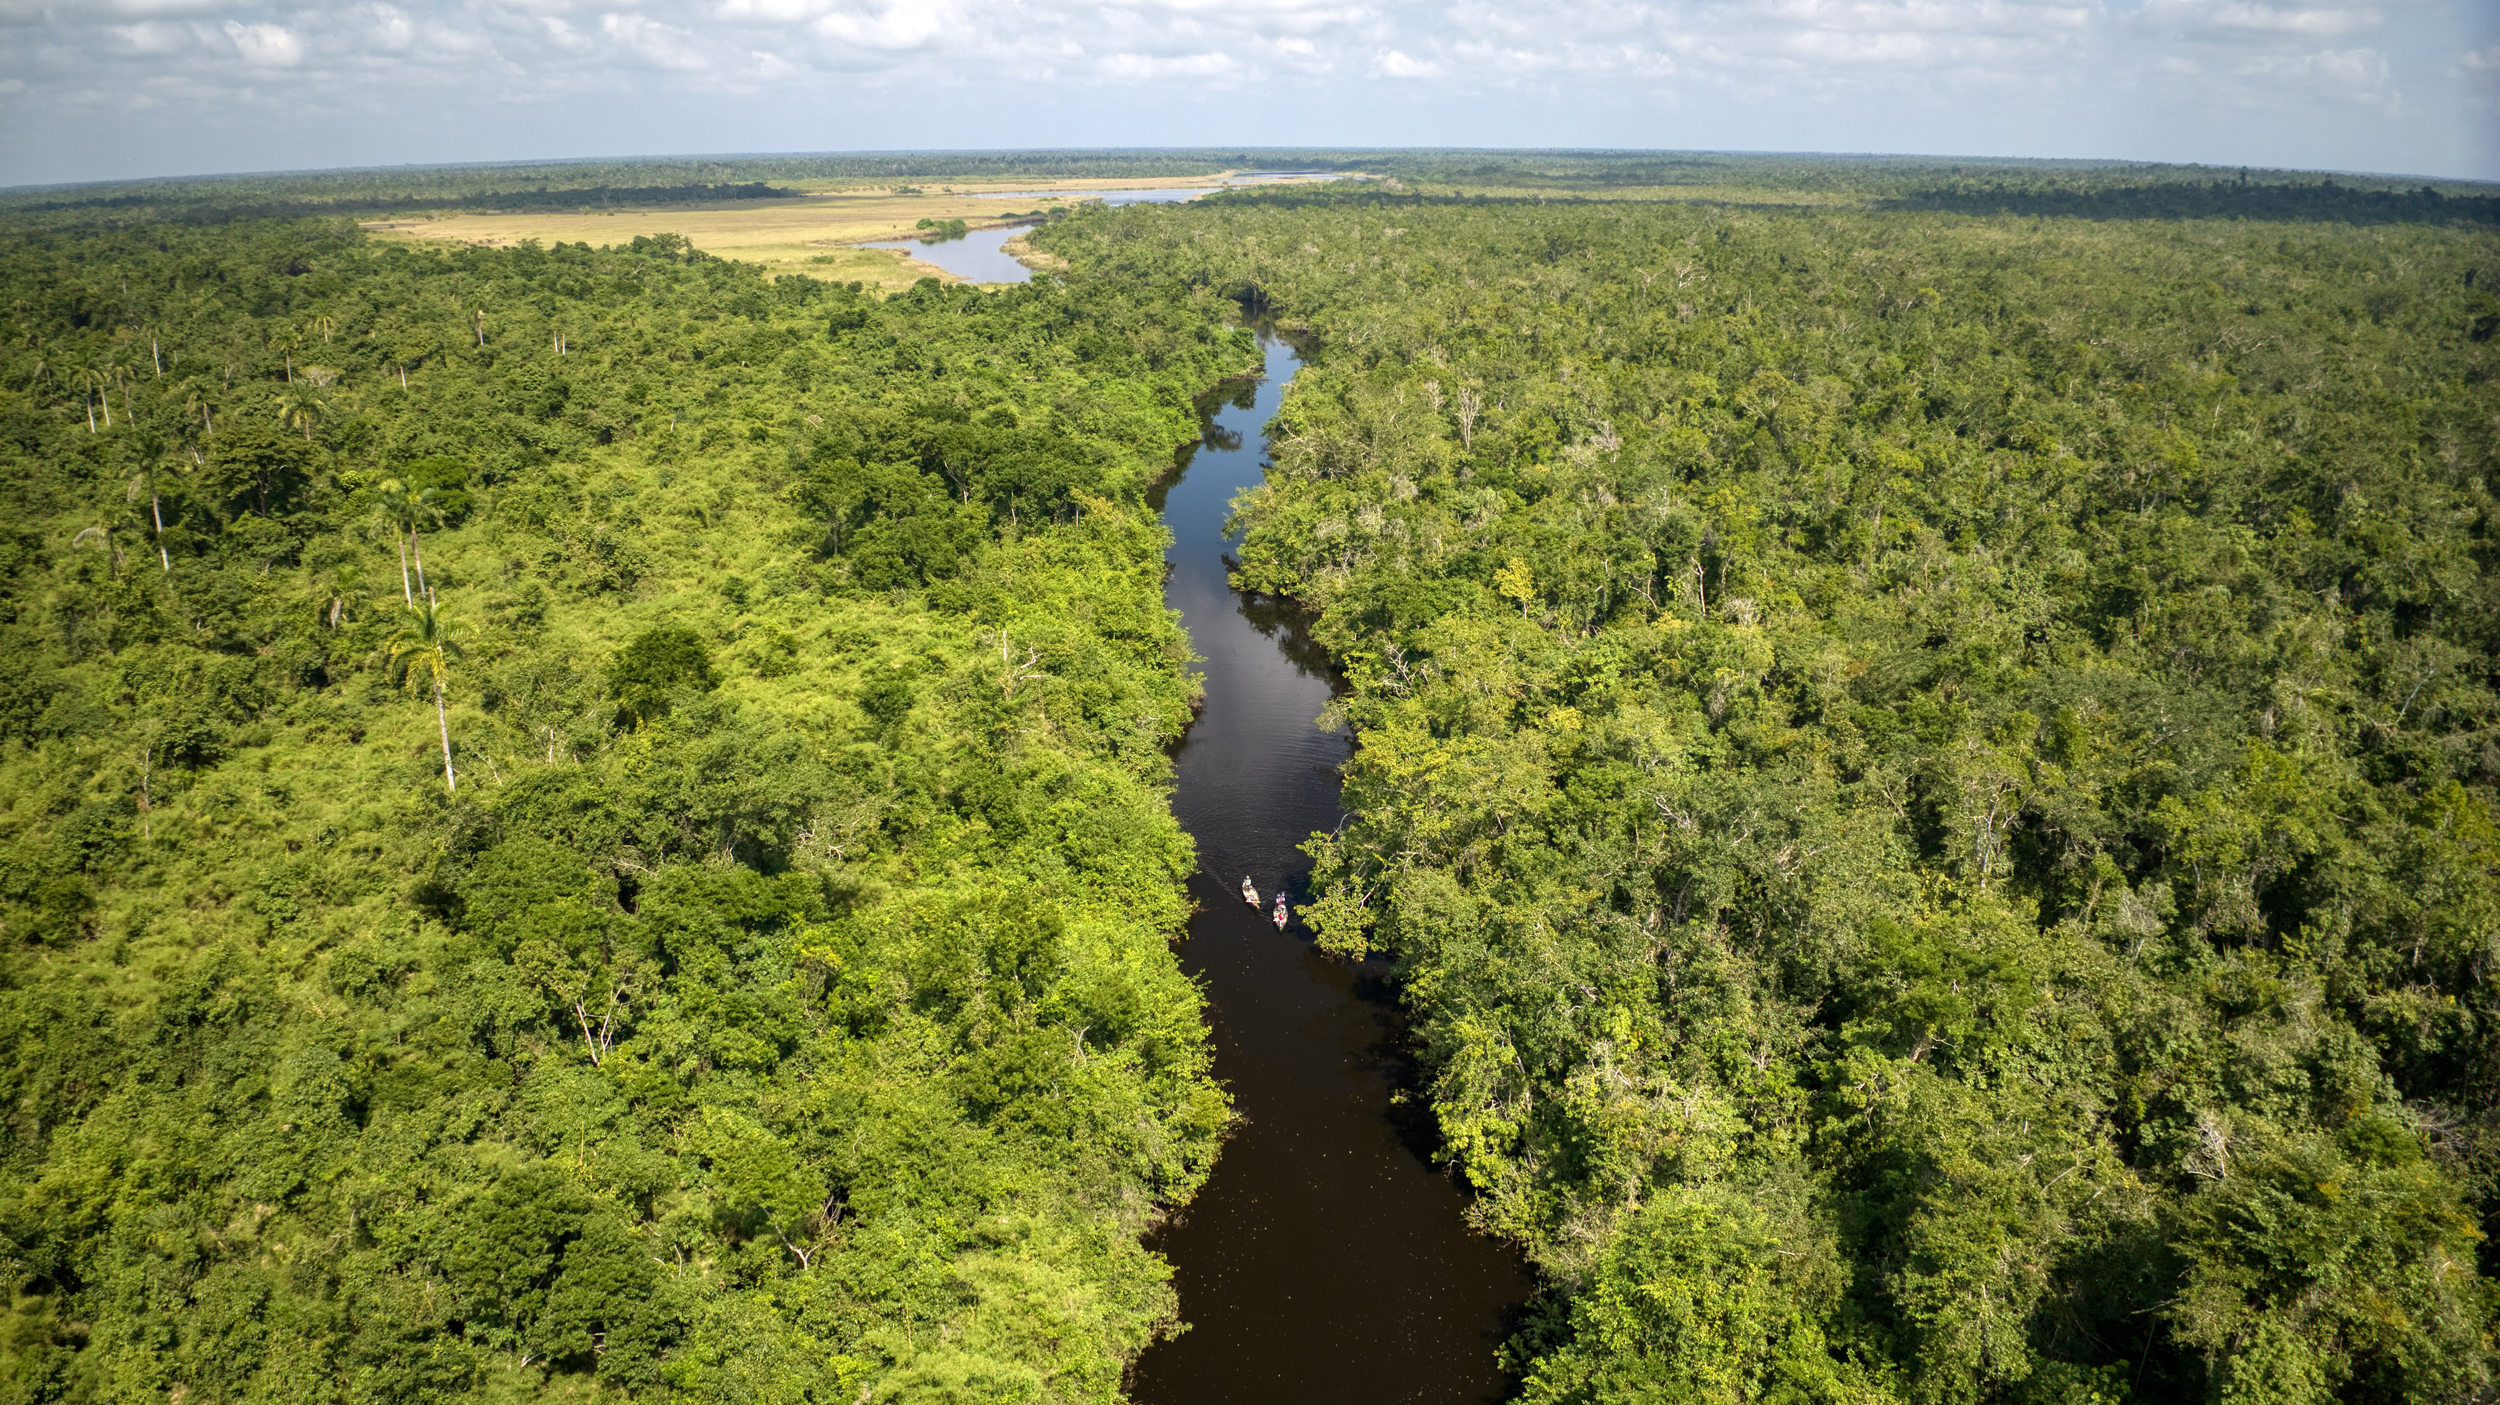 Can New Offset Markets Save Tropical Forests? The Promise of Carbon Credits